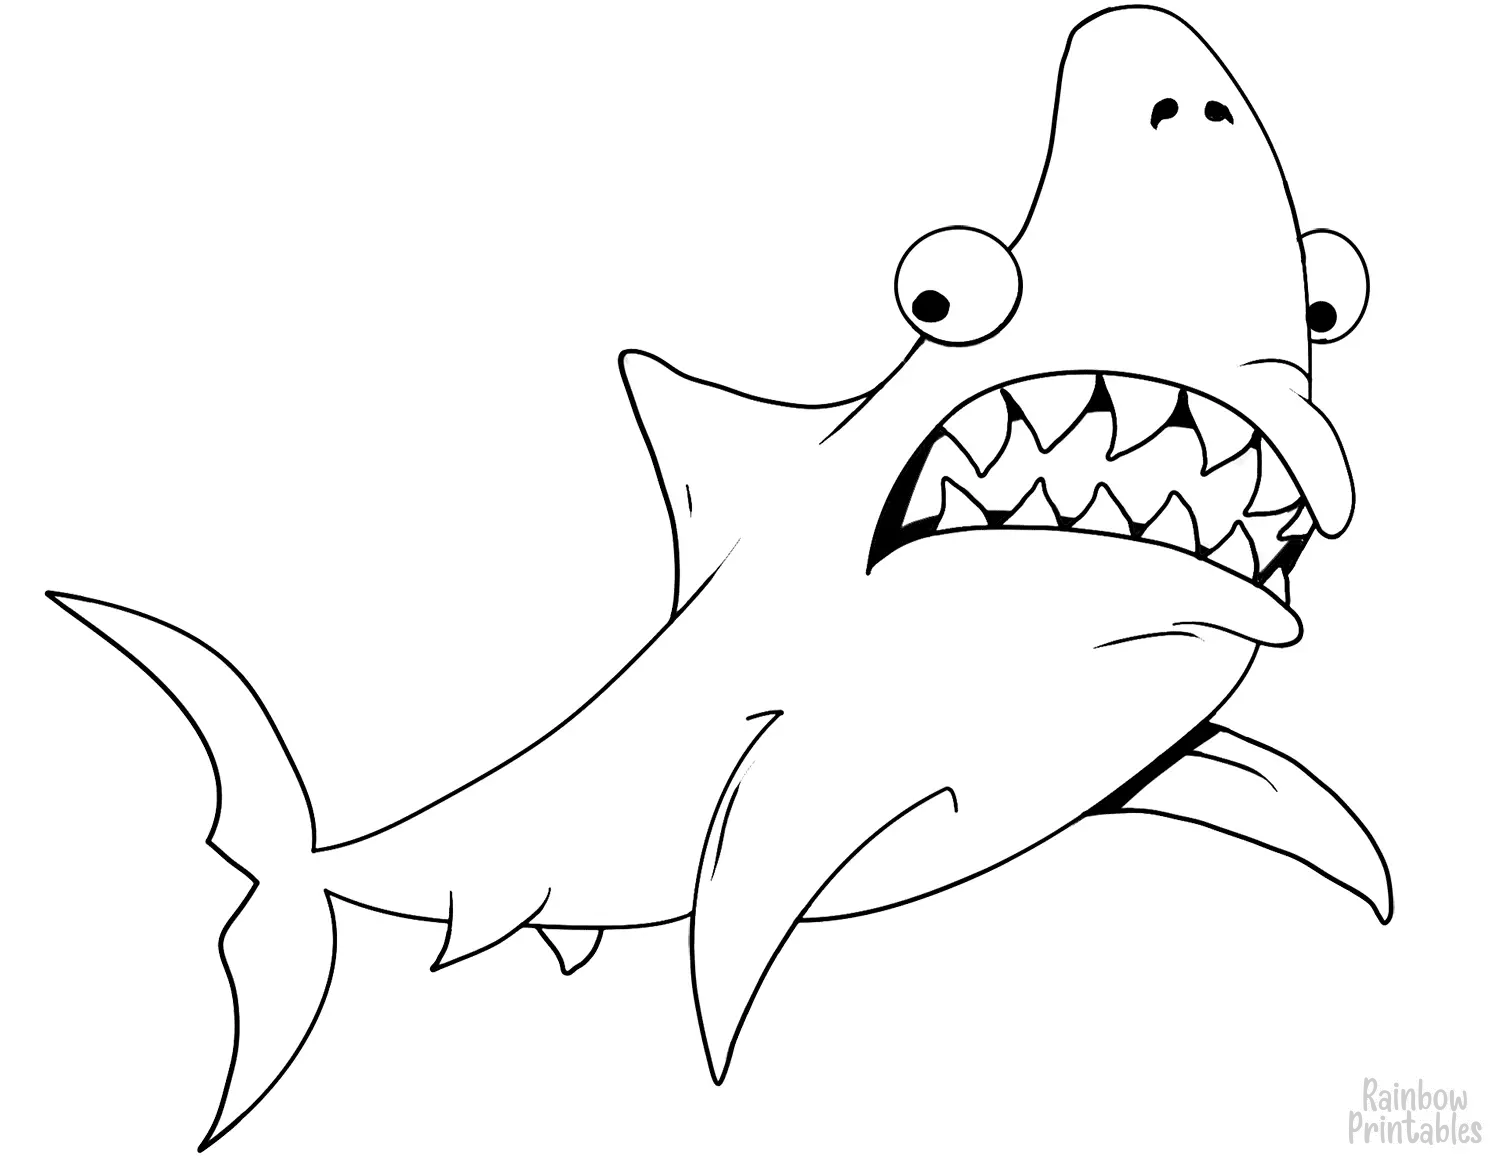 SIMPLE-EASY-line-drawings-SHARK-coloring-page-for-kids